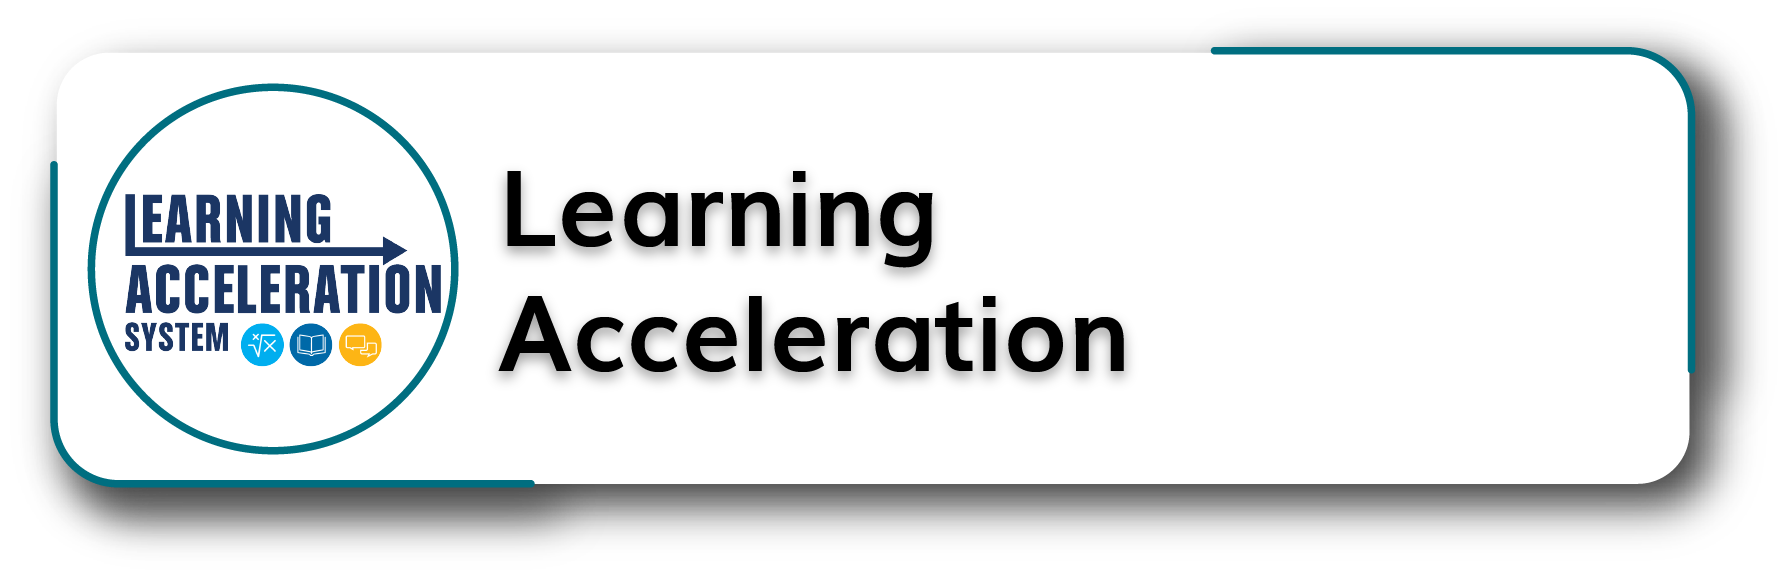 Learning Acceleration Button